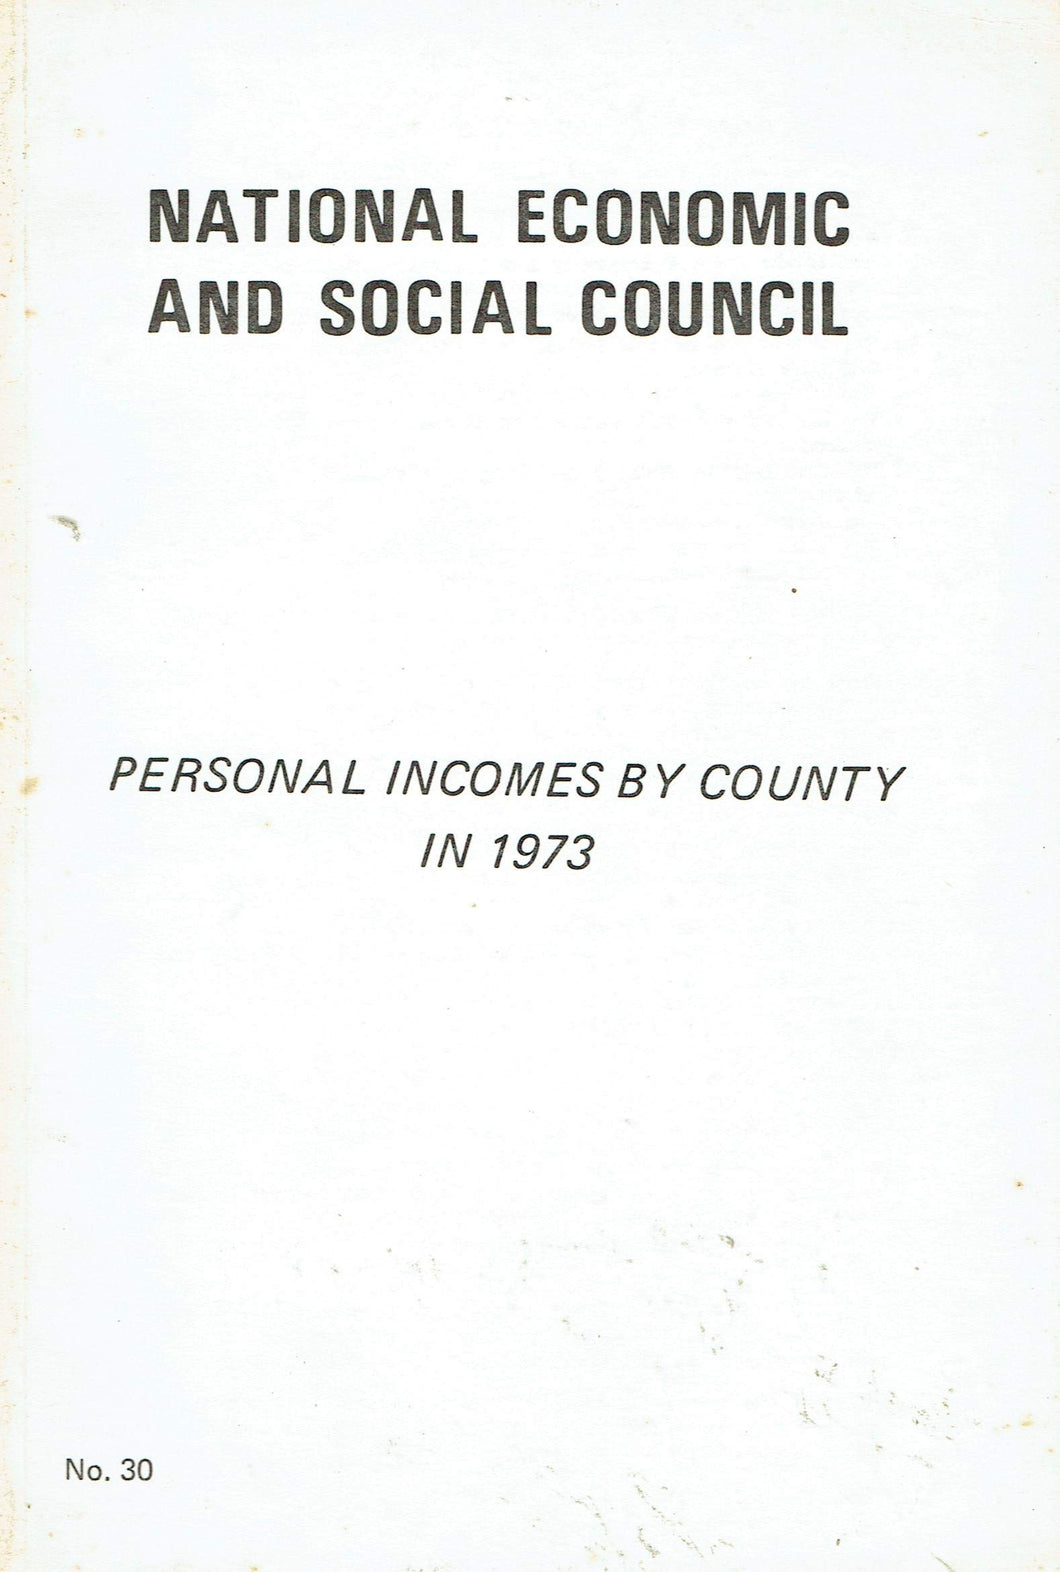 Personal Incomes by County in 1973: National Economic and Social Council